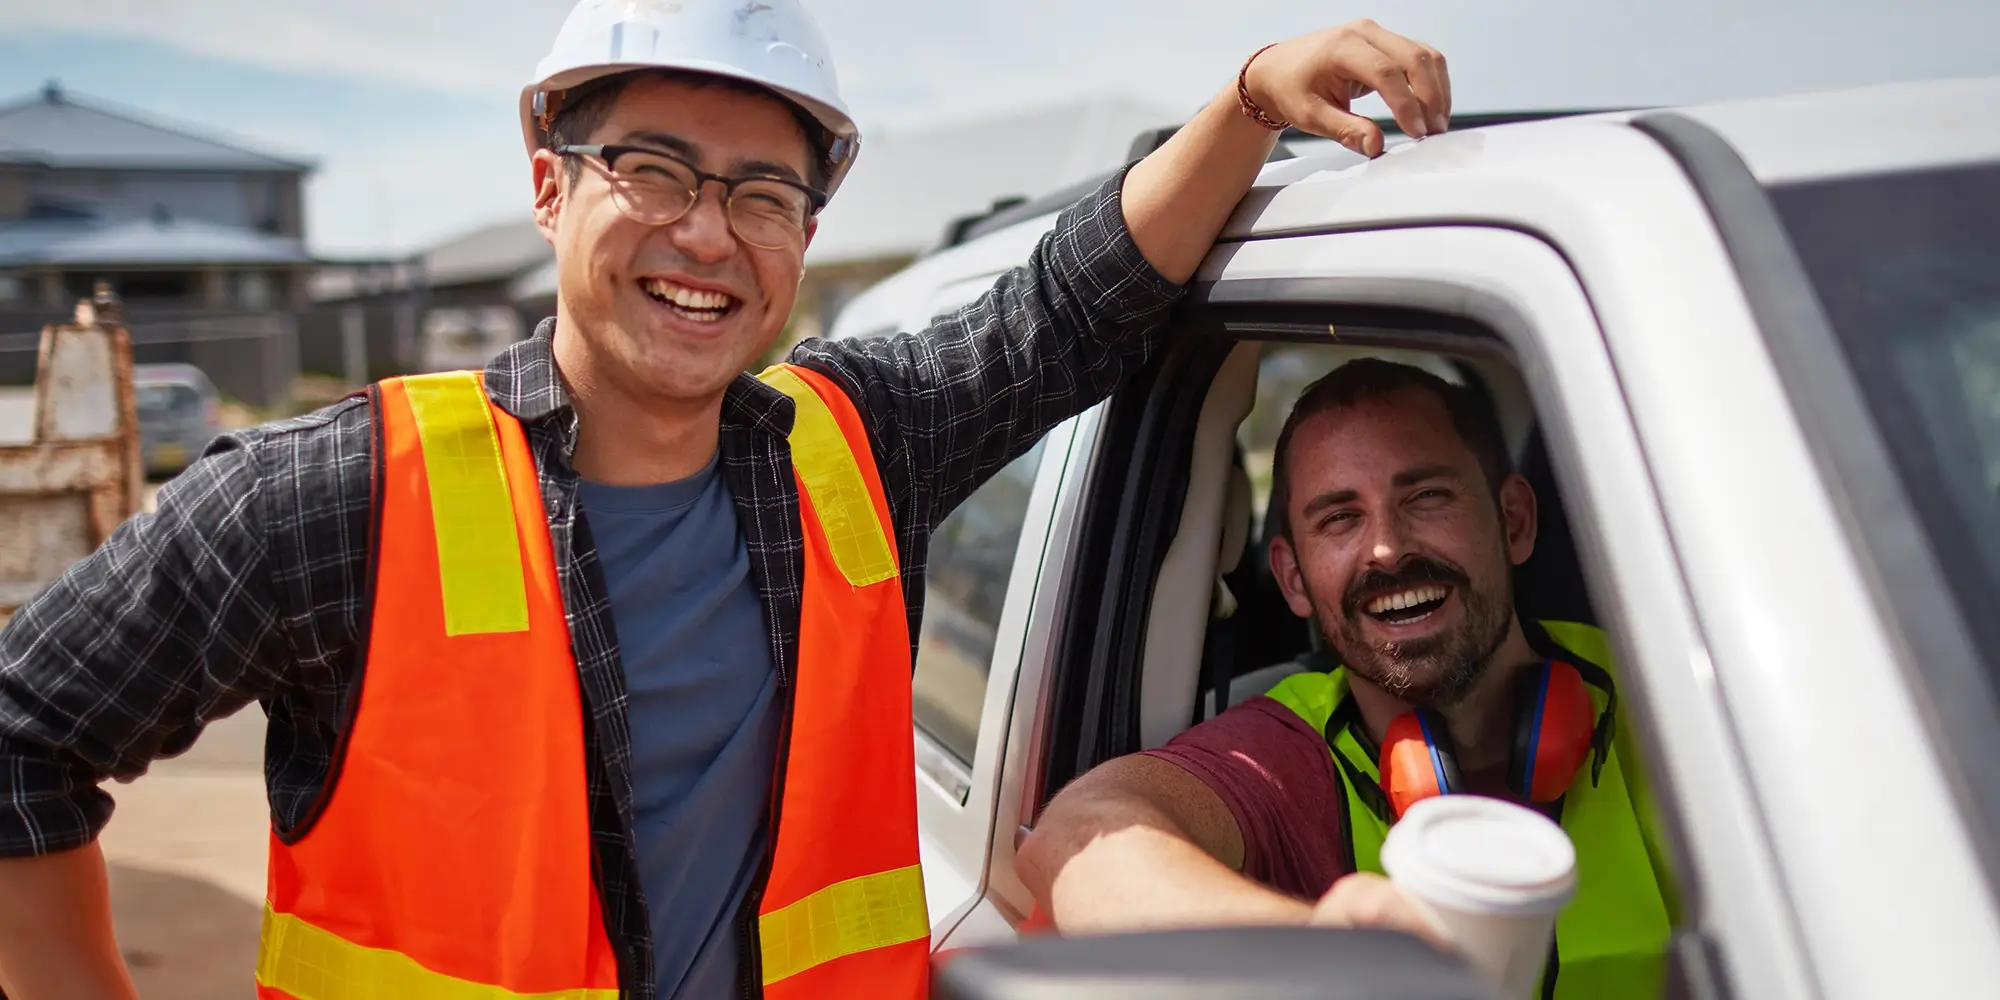 two contractors smiling, one sitting in car holding coffee cup, the other outside the car